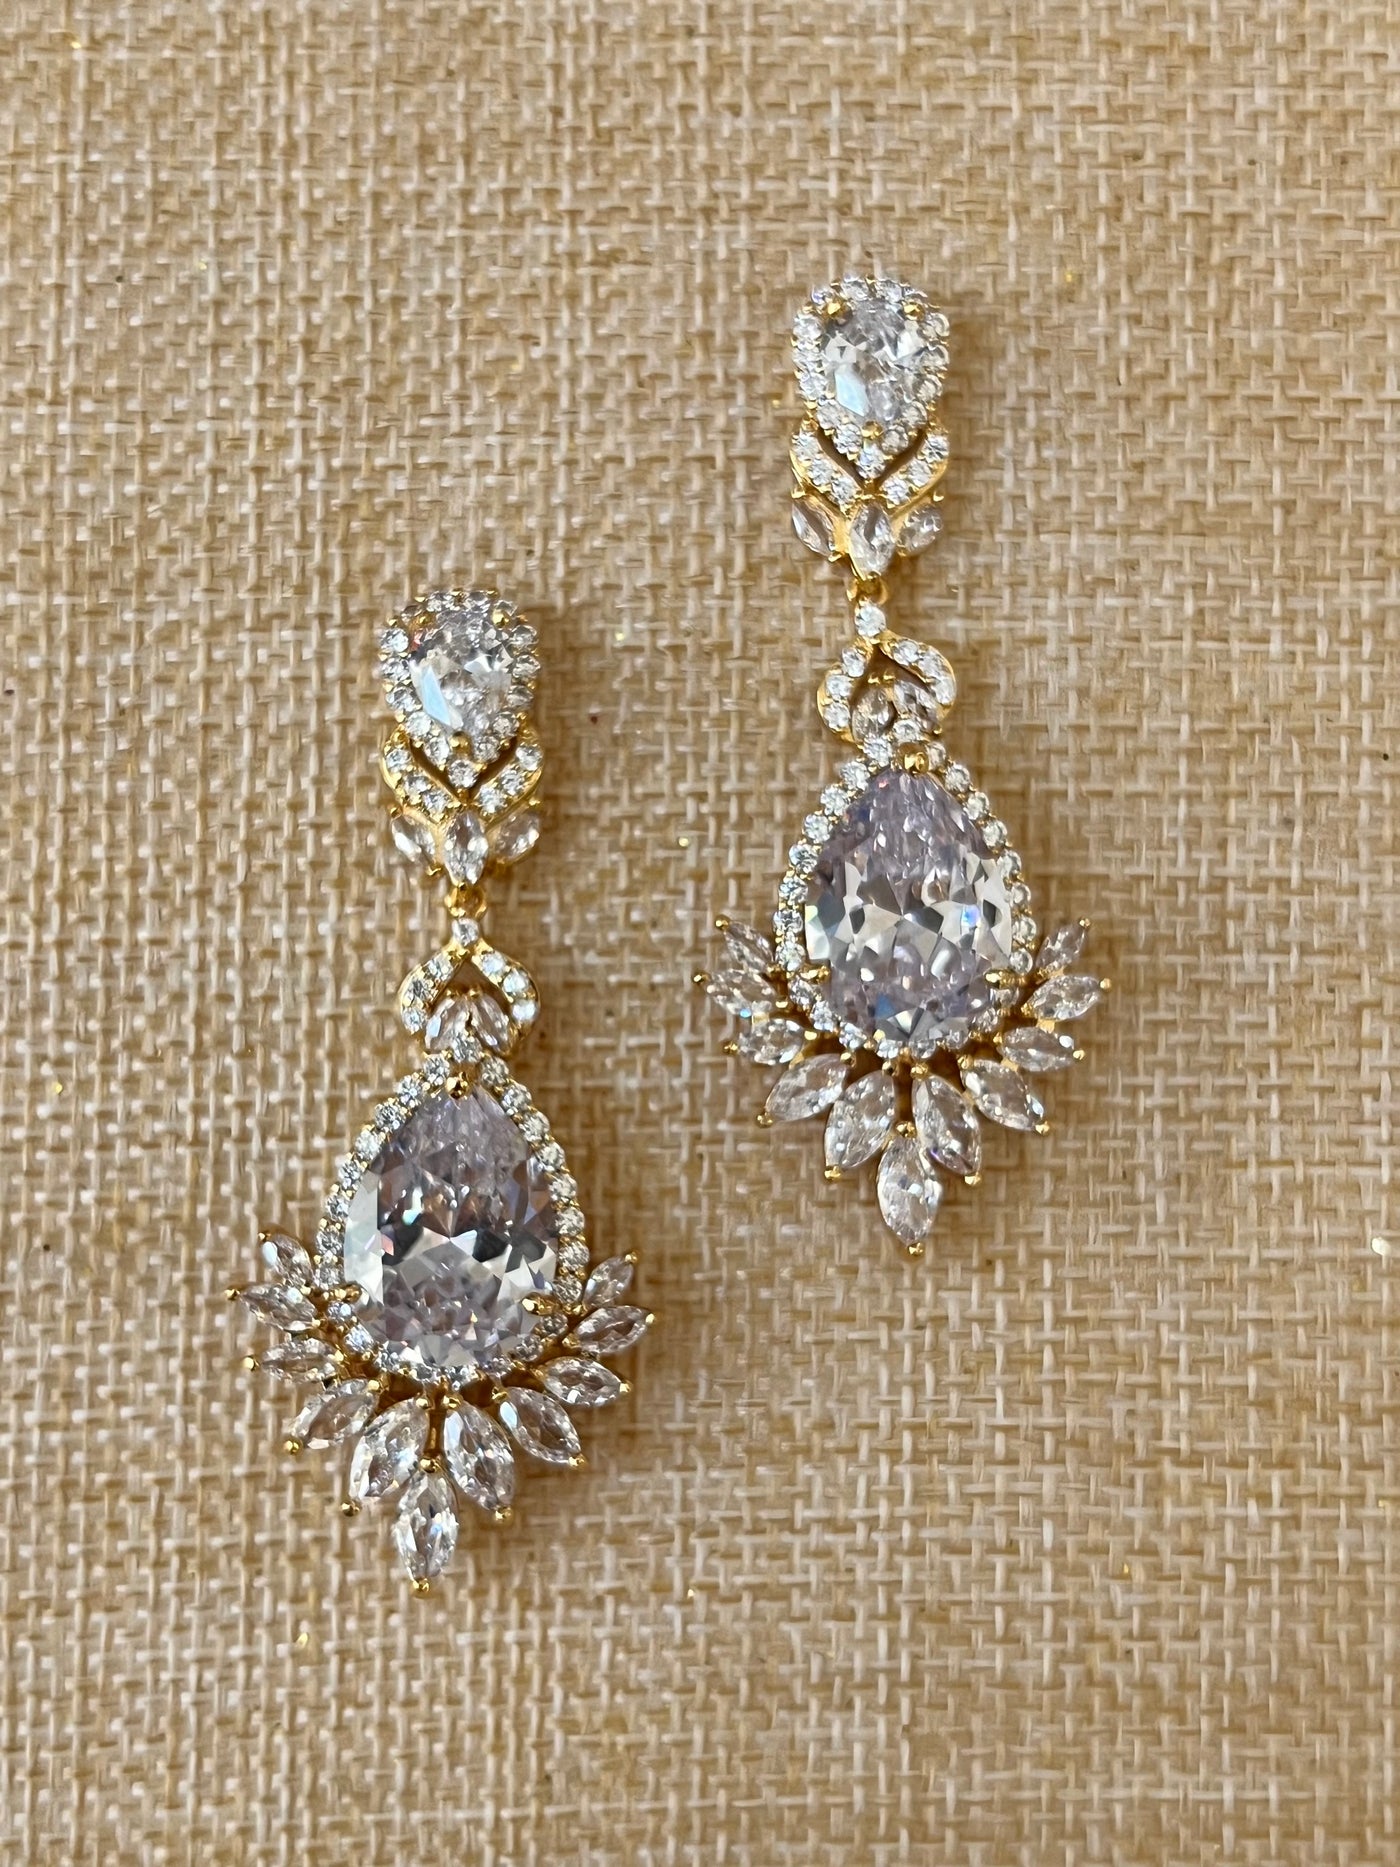 Gold Bridal Earrings, Swarovski and Zirconia Wedding jewelry, Luxury Drop Earring from Lucky Collections